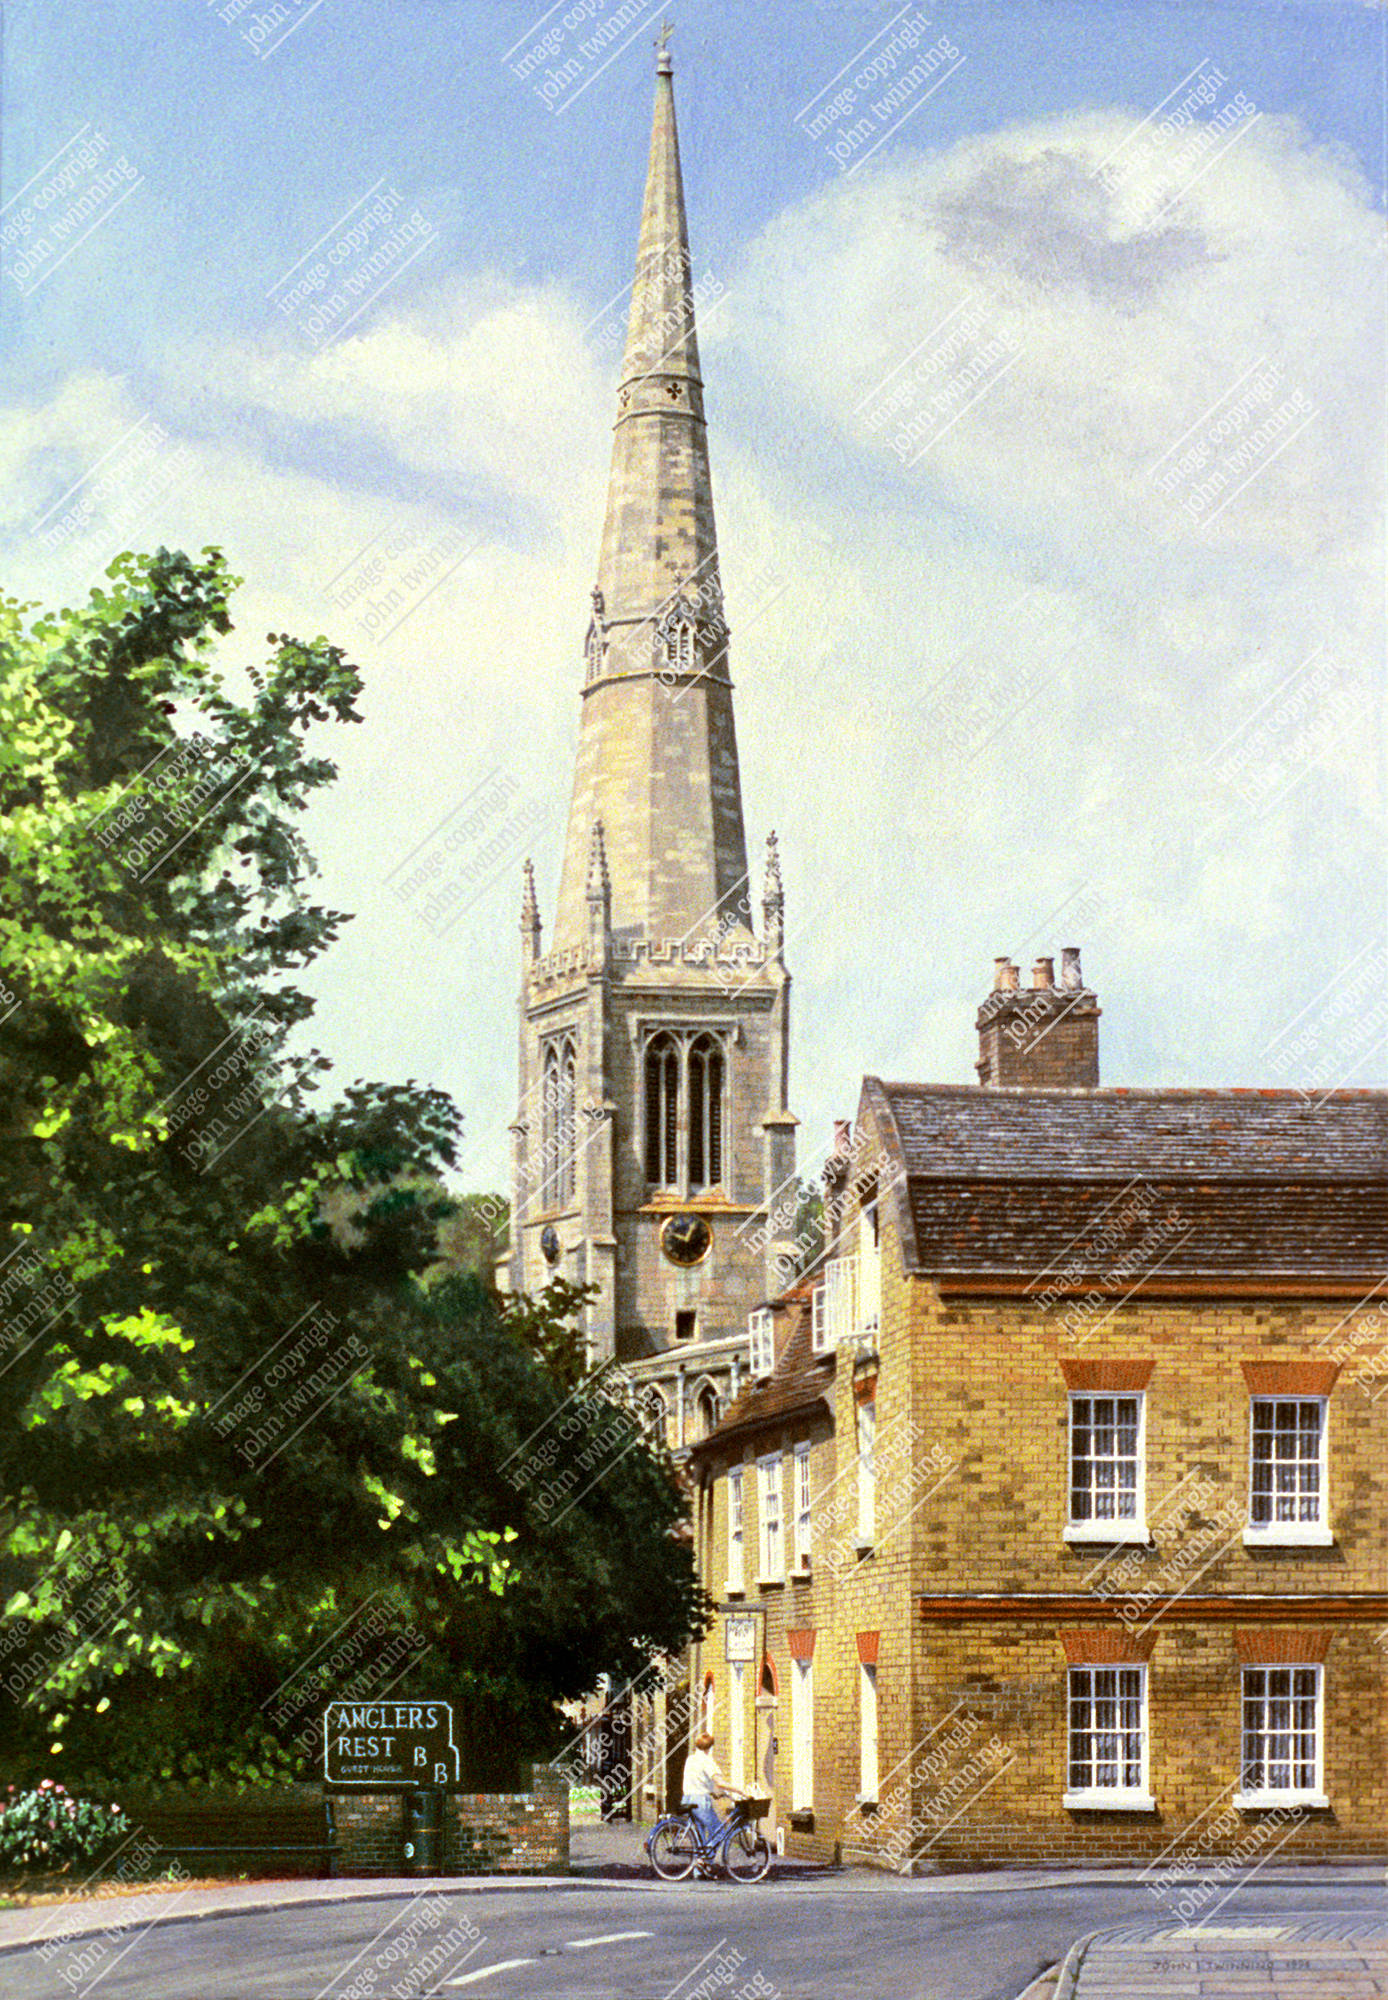 'The Parish Church And Angler's Rest, St. Ives' - art print from a painting of this cambridgeshire market town's parish church